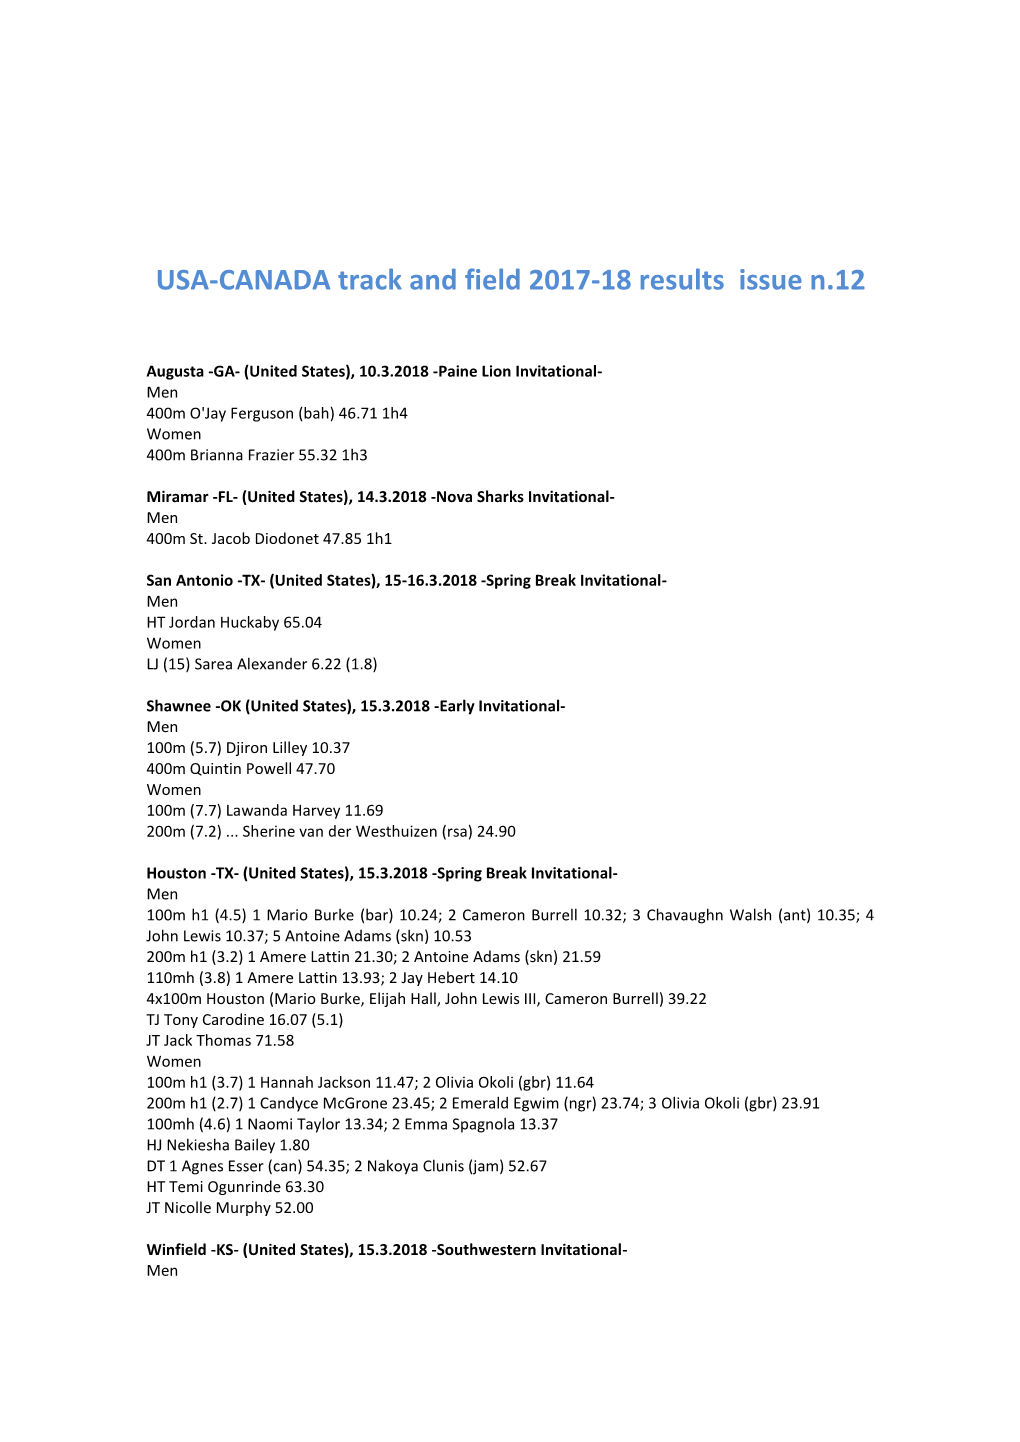 USA-CANADA Track and Field 2017-18 Results Issue N.12